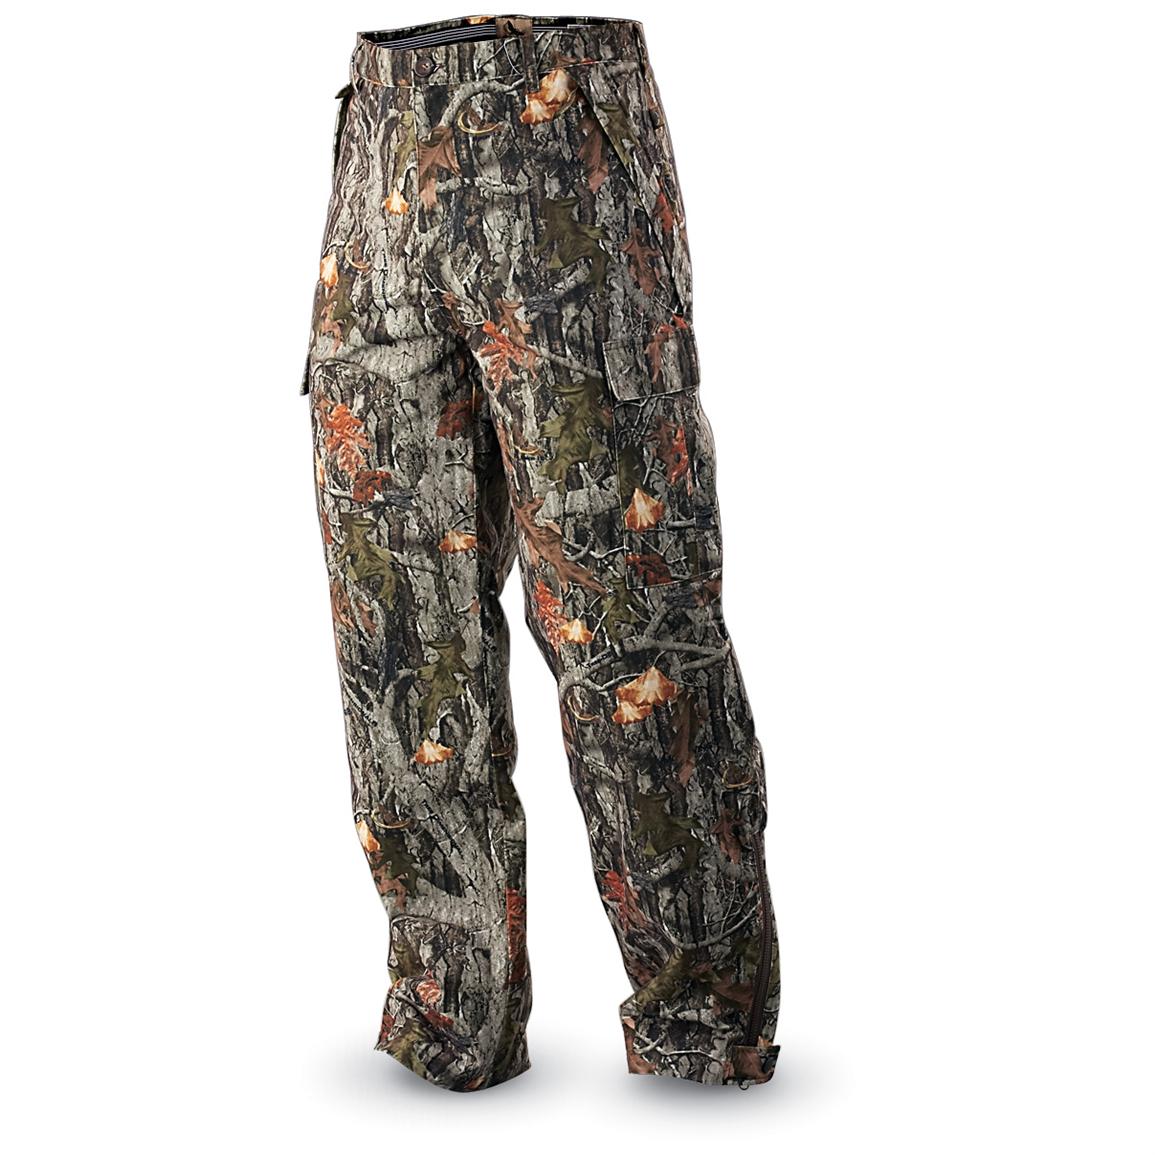 Mothwing™ Insulated Cargo Pants - 126743, Camo Pants at Sportsman's Guide